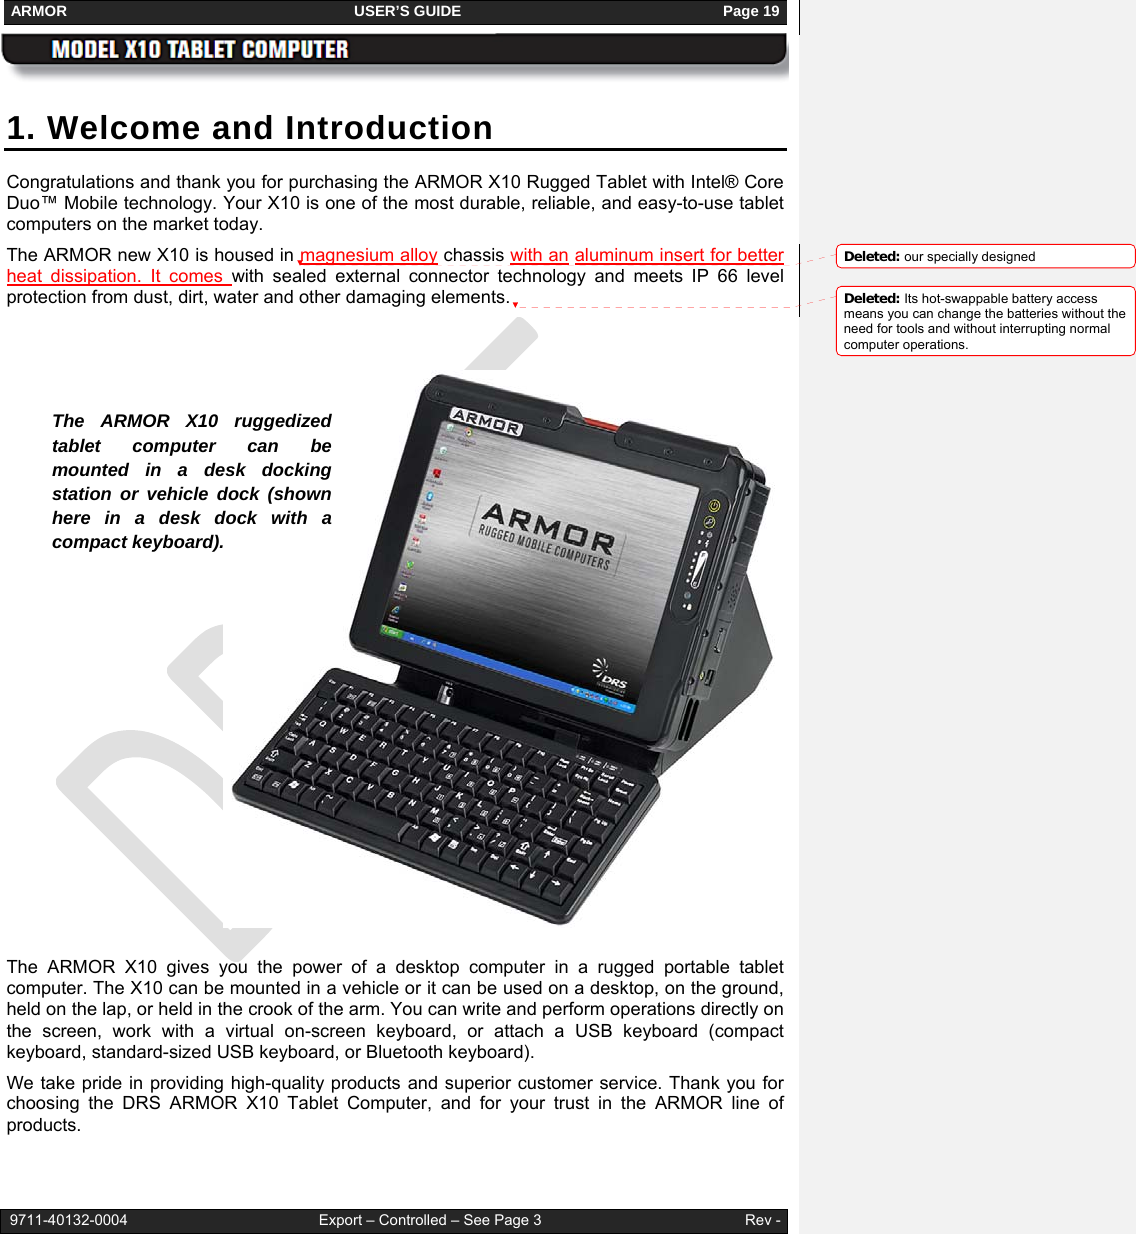 ARMOR                                                                     USER’S GUIDE                                                               Page 19   9711-40132-0004                                              Export – Controlled – See Page 3                                                 Rev - 1. Welcome and Introduction Congratulations and thank you for purchasing the ARMOR X10 Rugged Tablet with Intel® Core Duo™ Mobile technology. Your X10 is one of the most durable, reliable, and easy-to-use tablet computers on the market today.  The ARMOR new X10 is housed in magnesium alloy chassis with an aluminum insert for better heat dissipation. It comes with sealed external connector technology and meets IP 66 level protection from dust, dirt, water and other damaging elements.                  The ARMOR X10 gives you the power of a desktop computer in a rugged portable tablet computer. The X10 can be mounted in a vehicle or it can be used on a desktop, on the ground, held on the lap, or held in the crook of the arm. You can write and perform operations directly on the screen, work with a virtual on-screen keyboard, or attach a USB keyboard (compact keyboard, standard-sized USB keyboard, or Bluetooth keyboard).  We take pride in providing high-quality products and superior customer service. Thank you for choosing the DRS ARMOR X10 Tablet Computer, and for your trust in the ARMOR line of products. The ARMOR X10 ruggedized tablet computer can be mounted in a desk docking station or vehicle dock (shown here in a desk dock with a compact keyboard).  Deleted: our specially designed Deleted: Its hot-swappable battery access means you can change the batteries without the need for tools and without interrupting normal computer operations. 